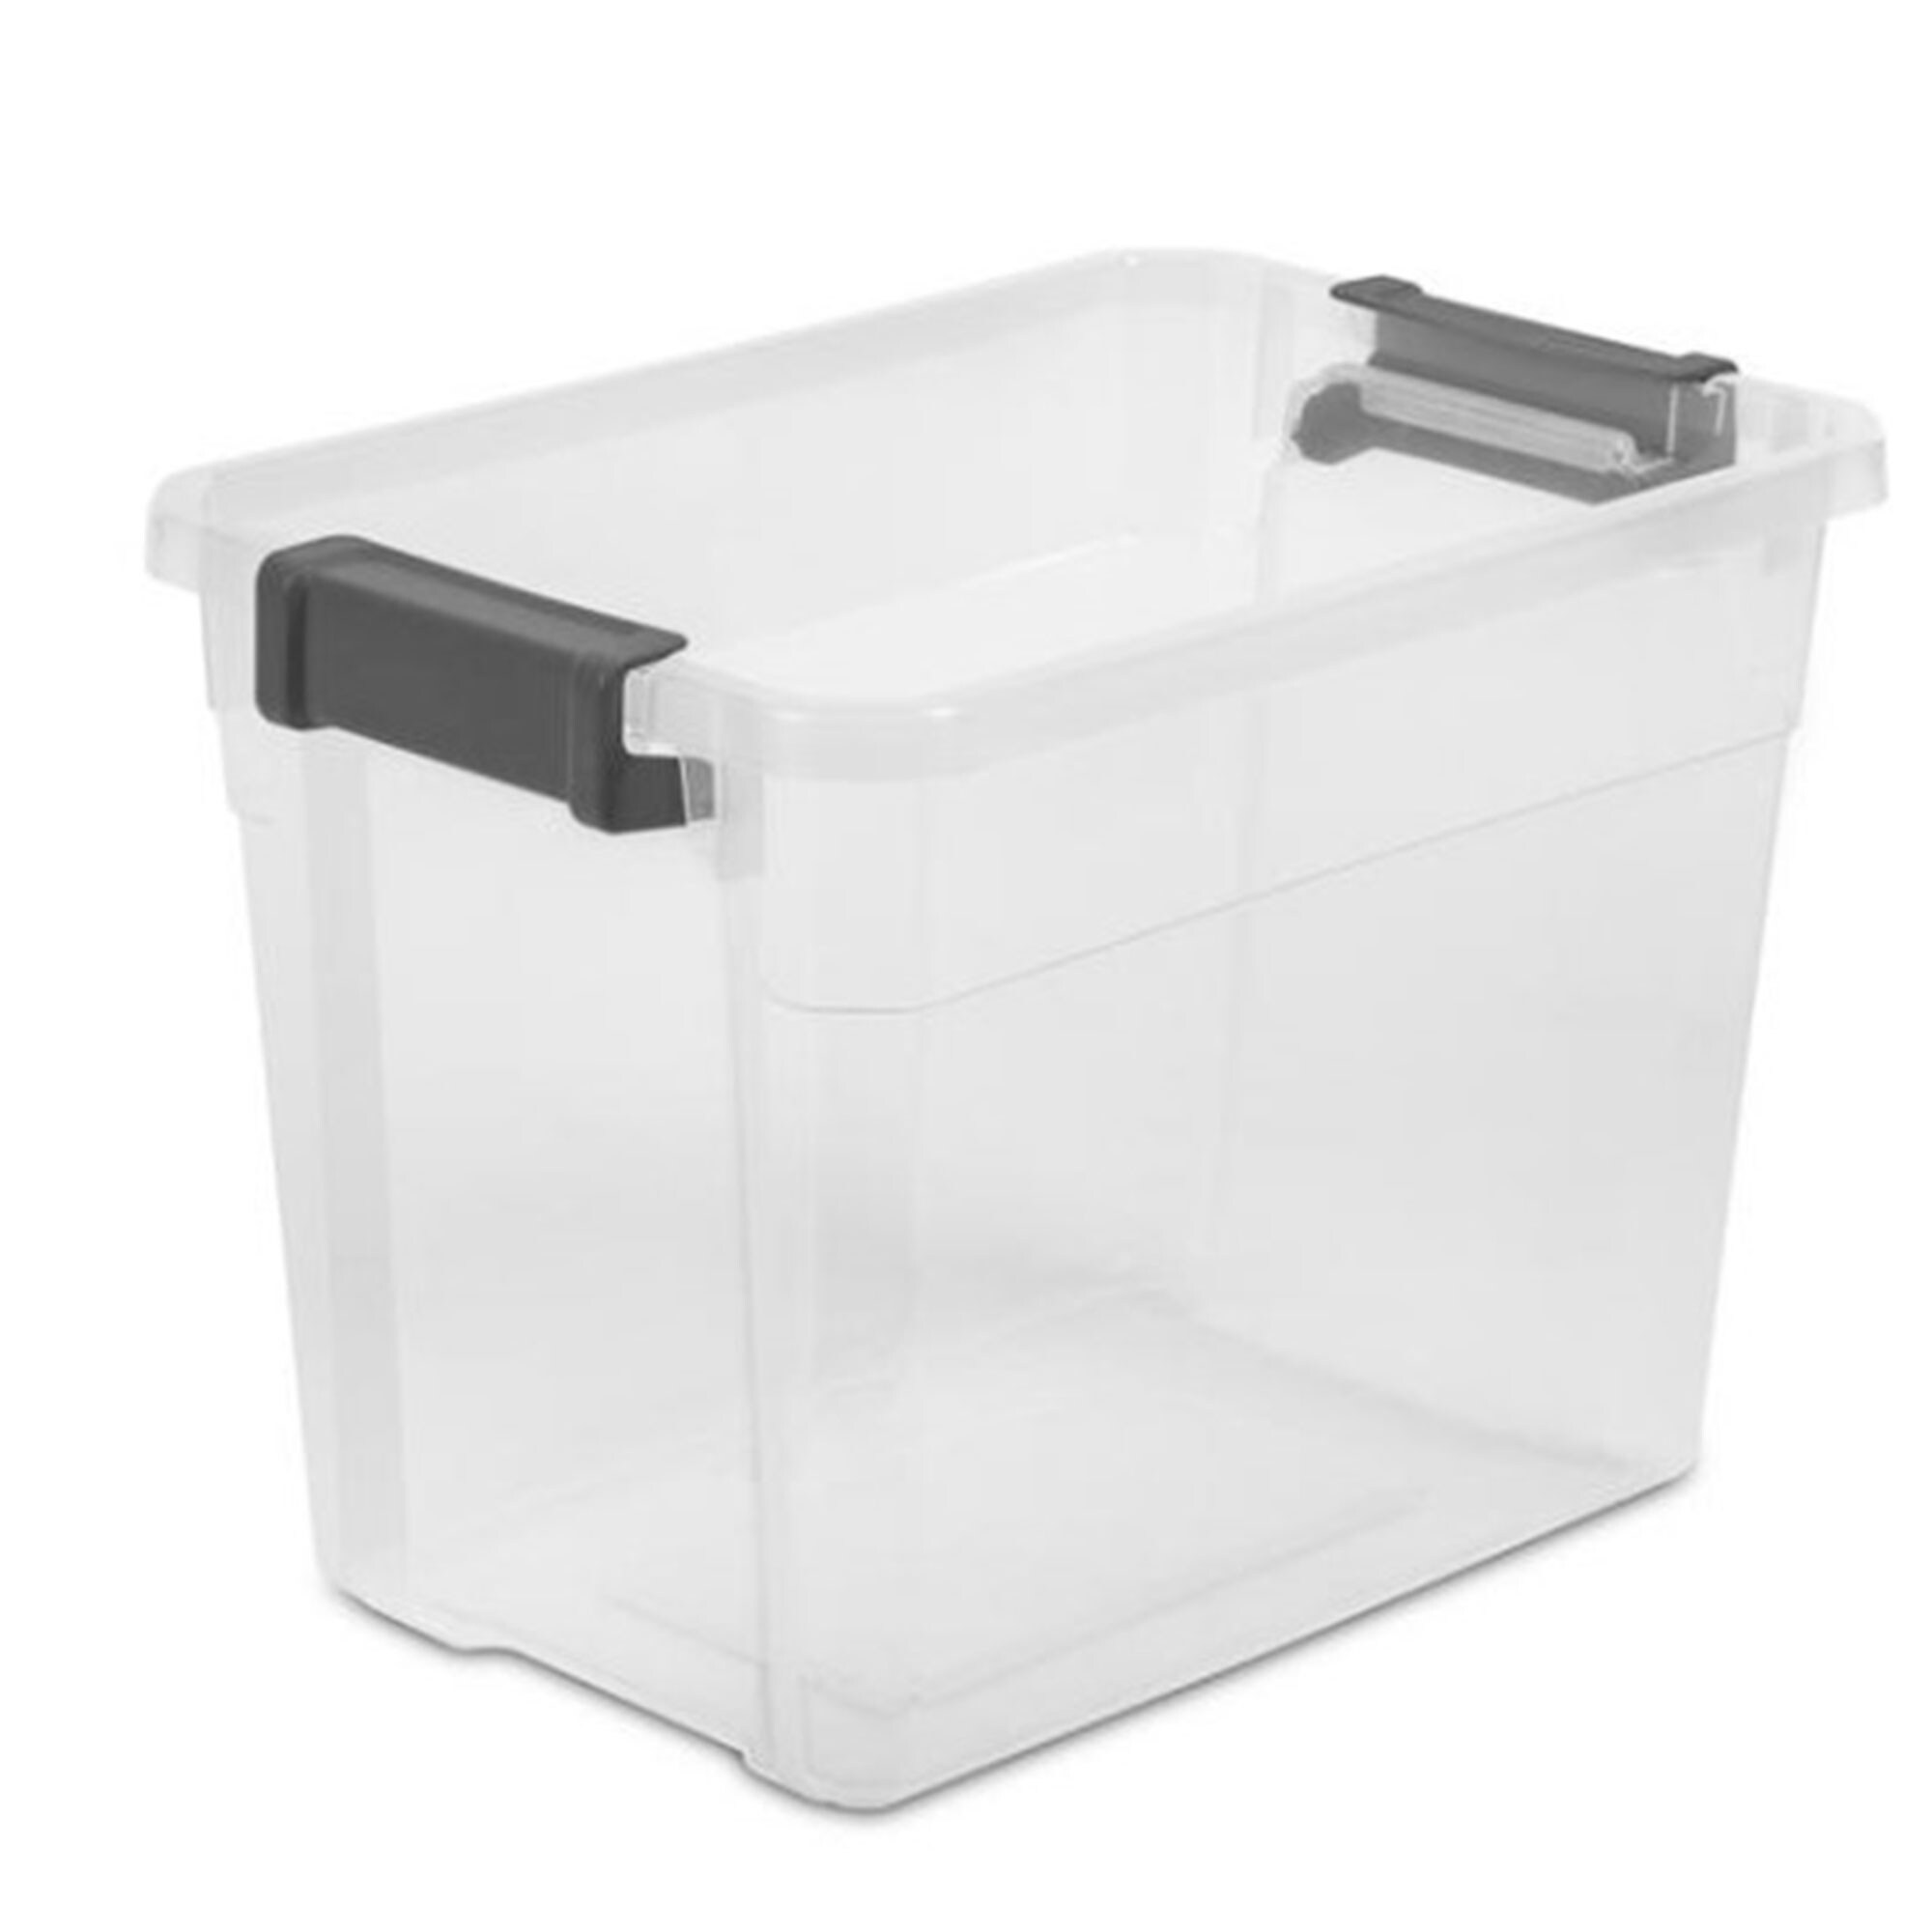 Sterilite 30 Qt Ultra Latch Box Stackable Storage Bin with Latching Lid,  Organize Crafts, Clothes in Closets, Basements, Clear with White Lid,  12-Pack